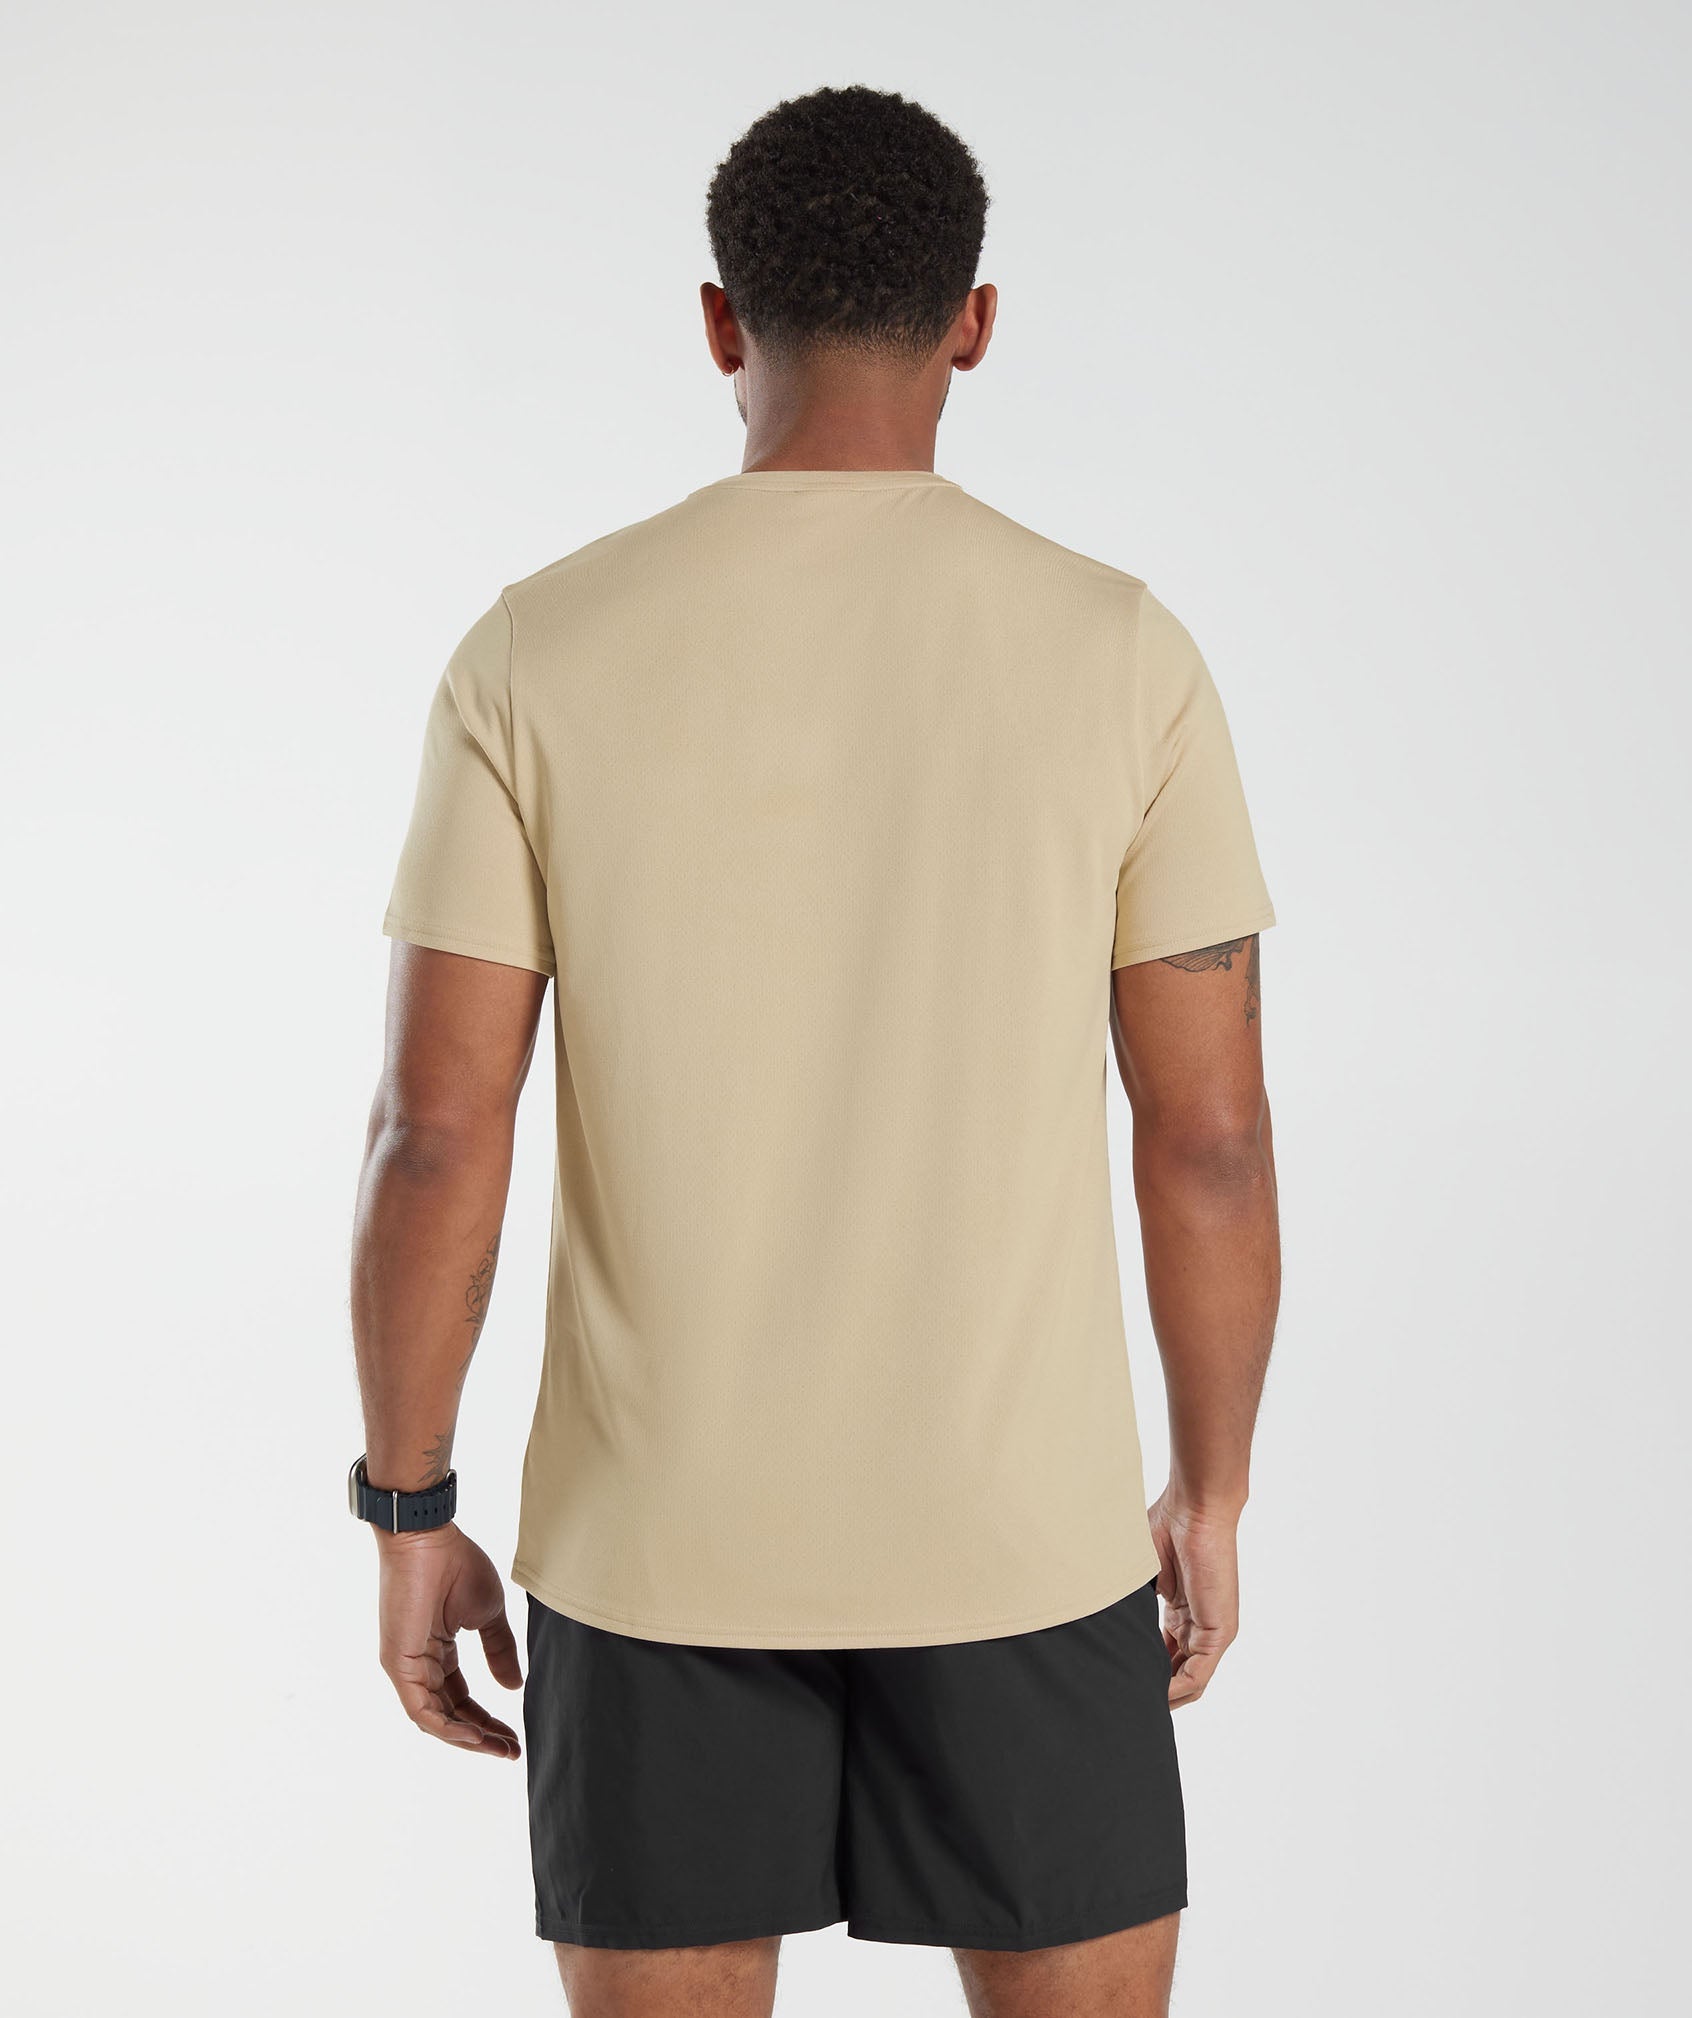 Arrival T-Shirt in Toasted Brown - view 2